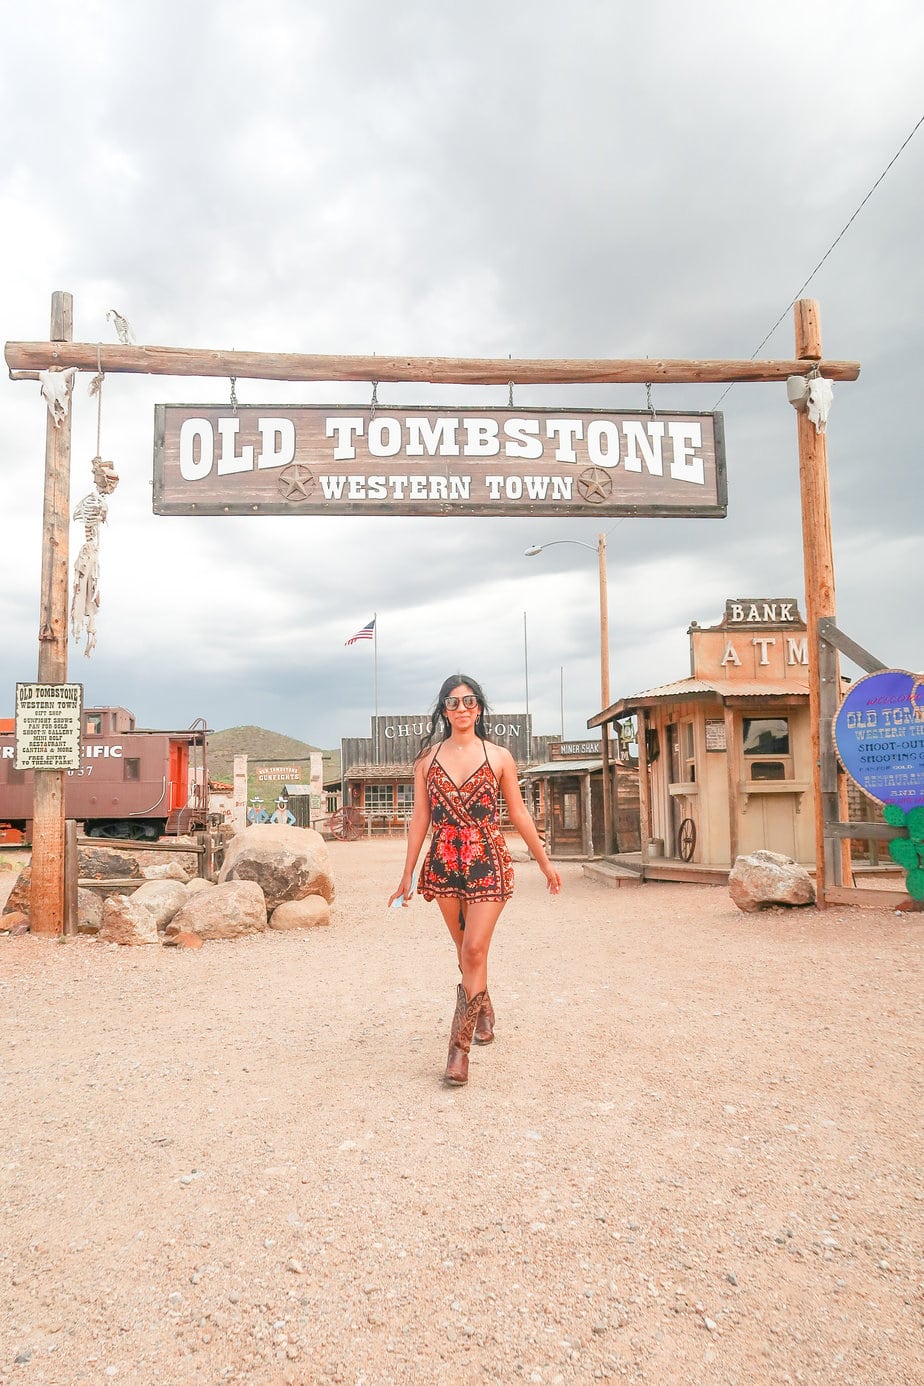 Tombstone Arizona: How To Visit & Things To Do (2023)